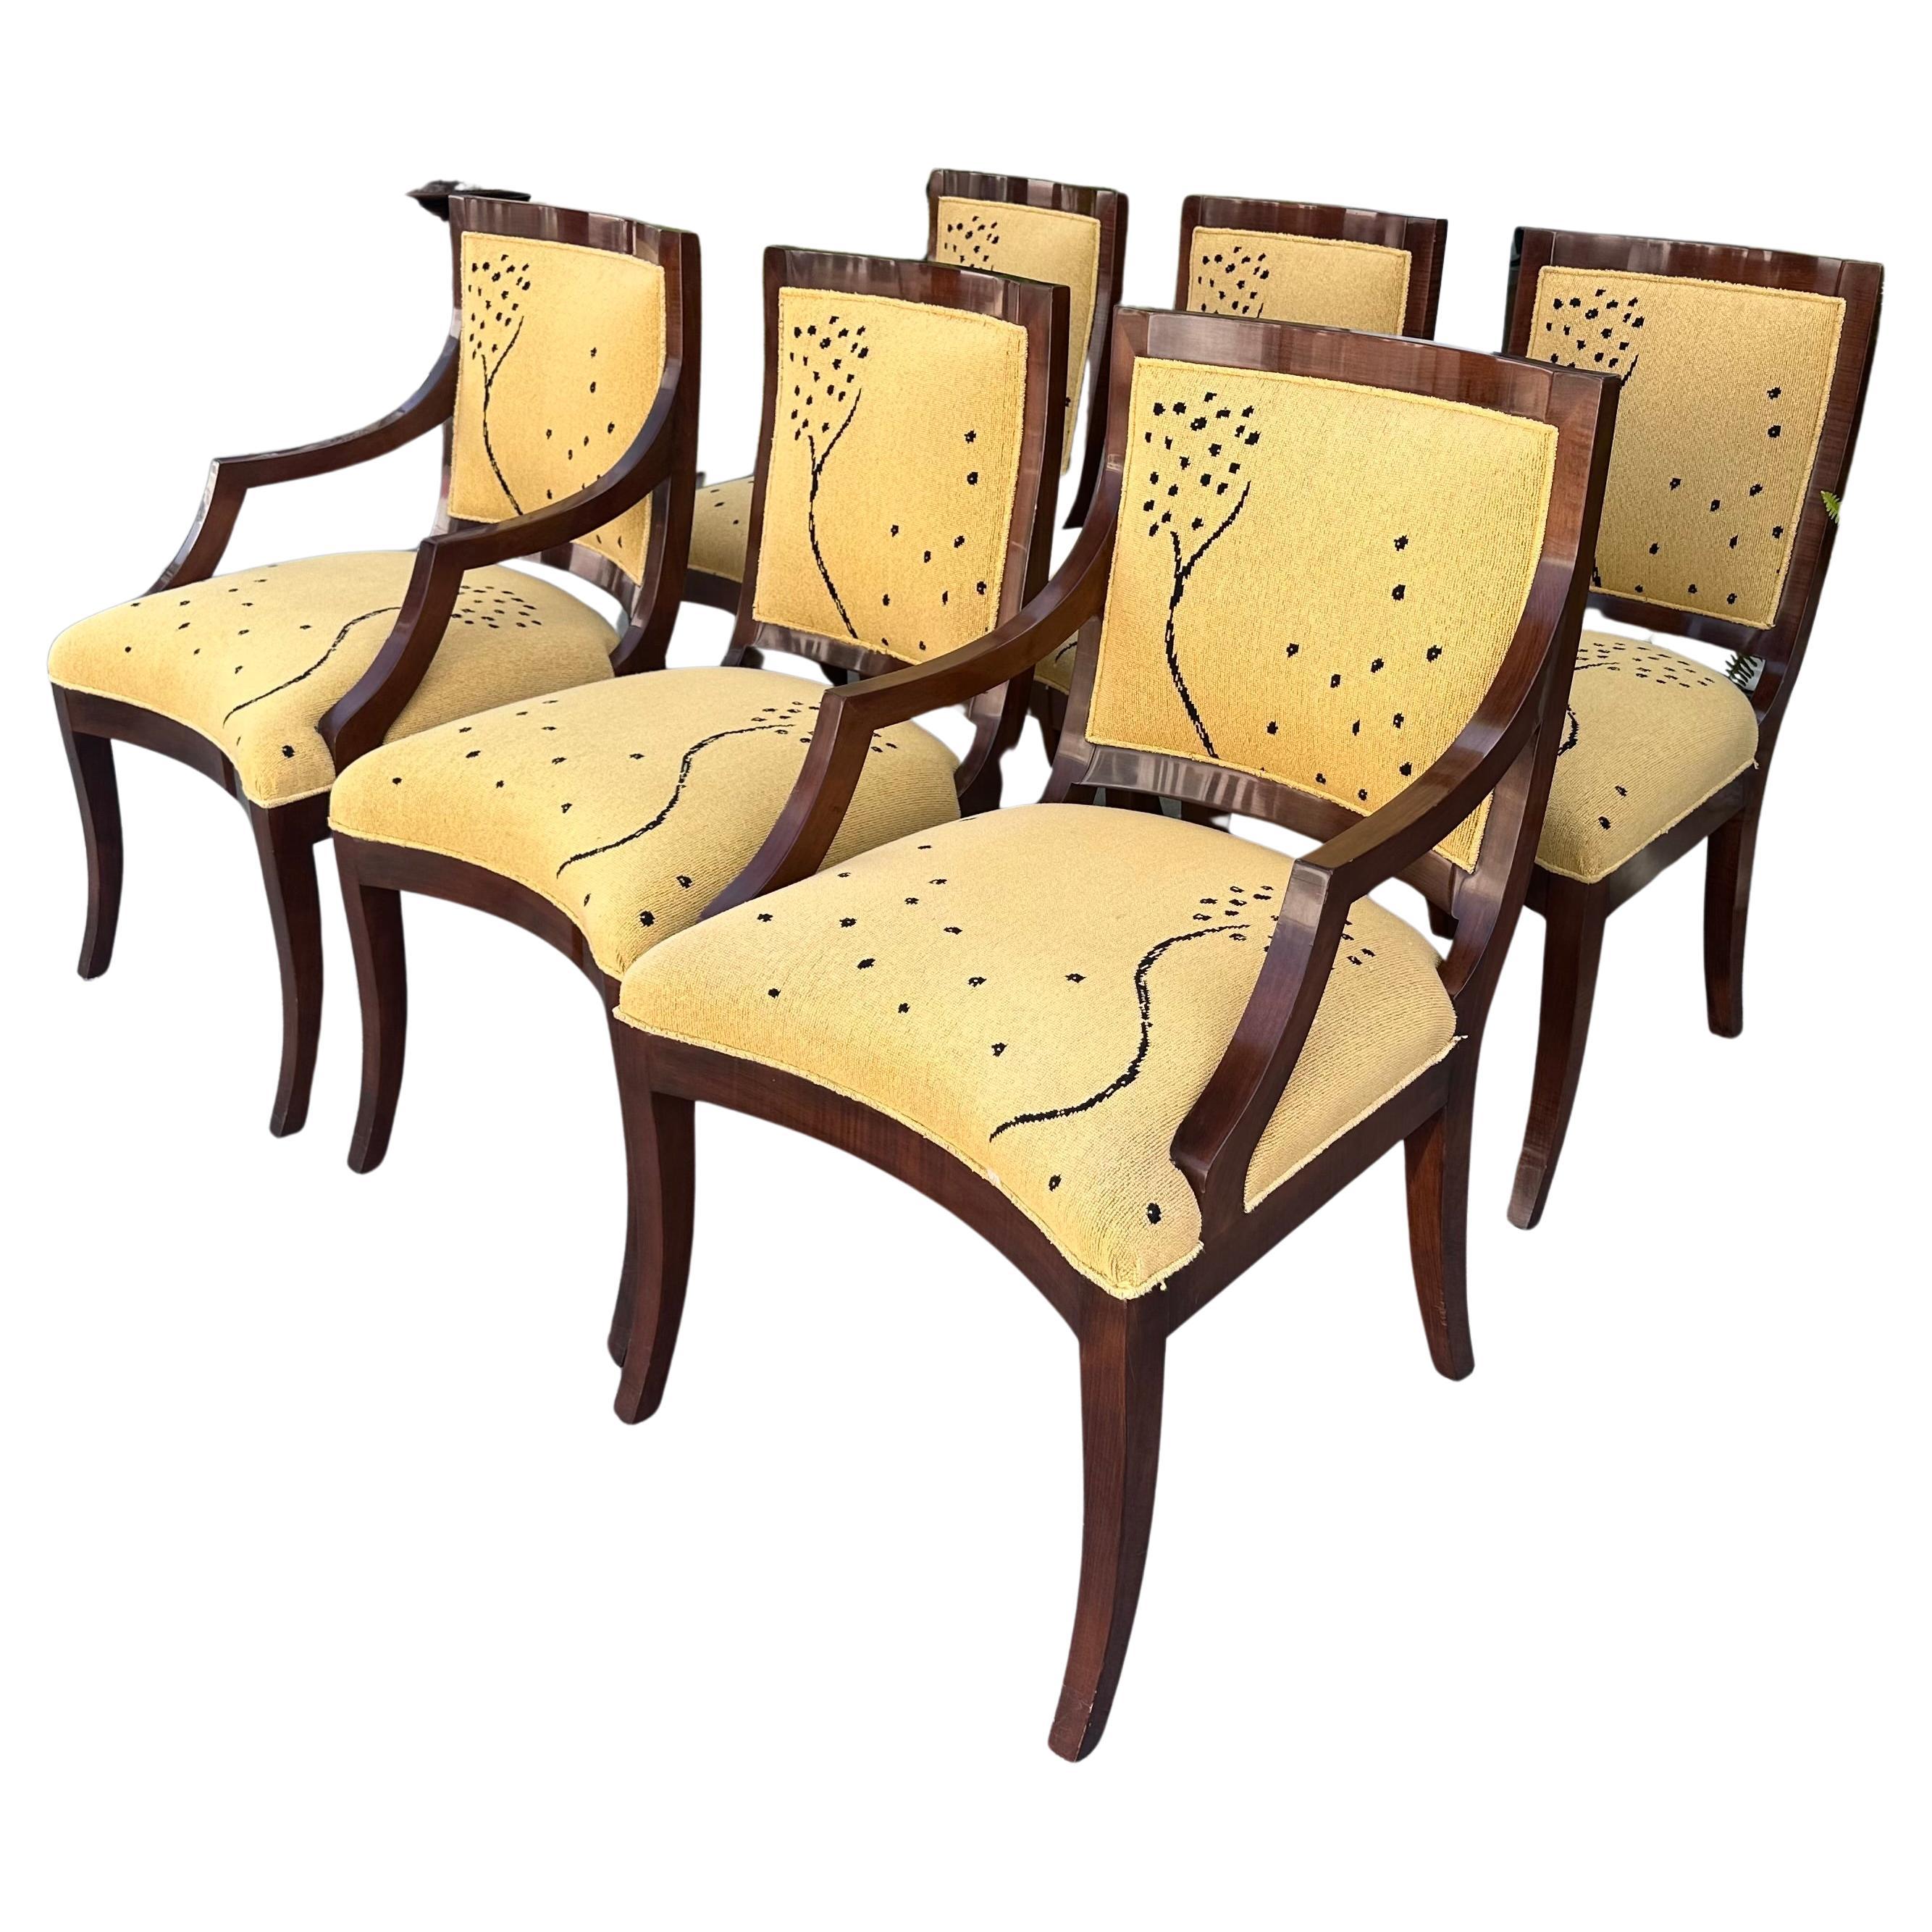 J. Robert Scott Art Deco Style Dining Chairs For Sale